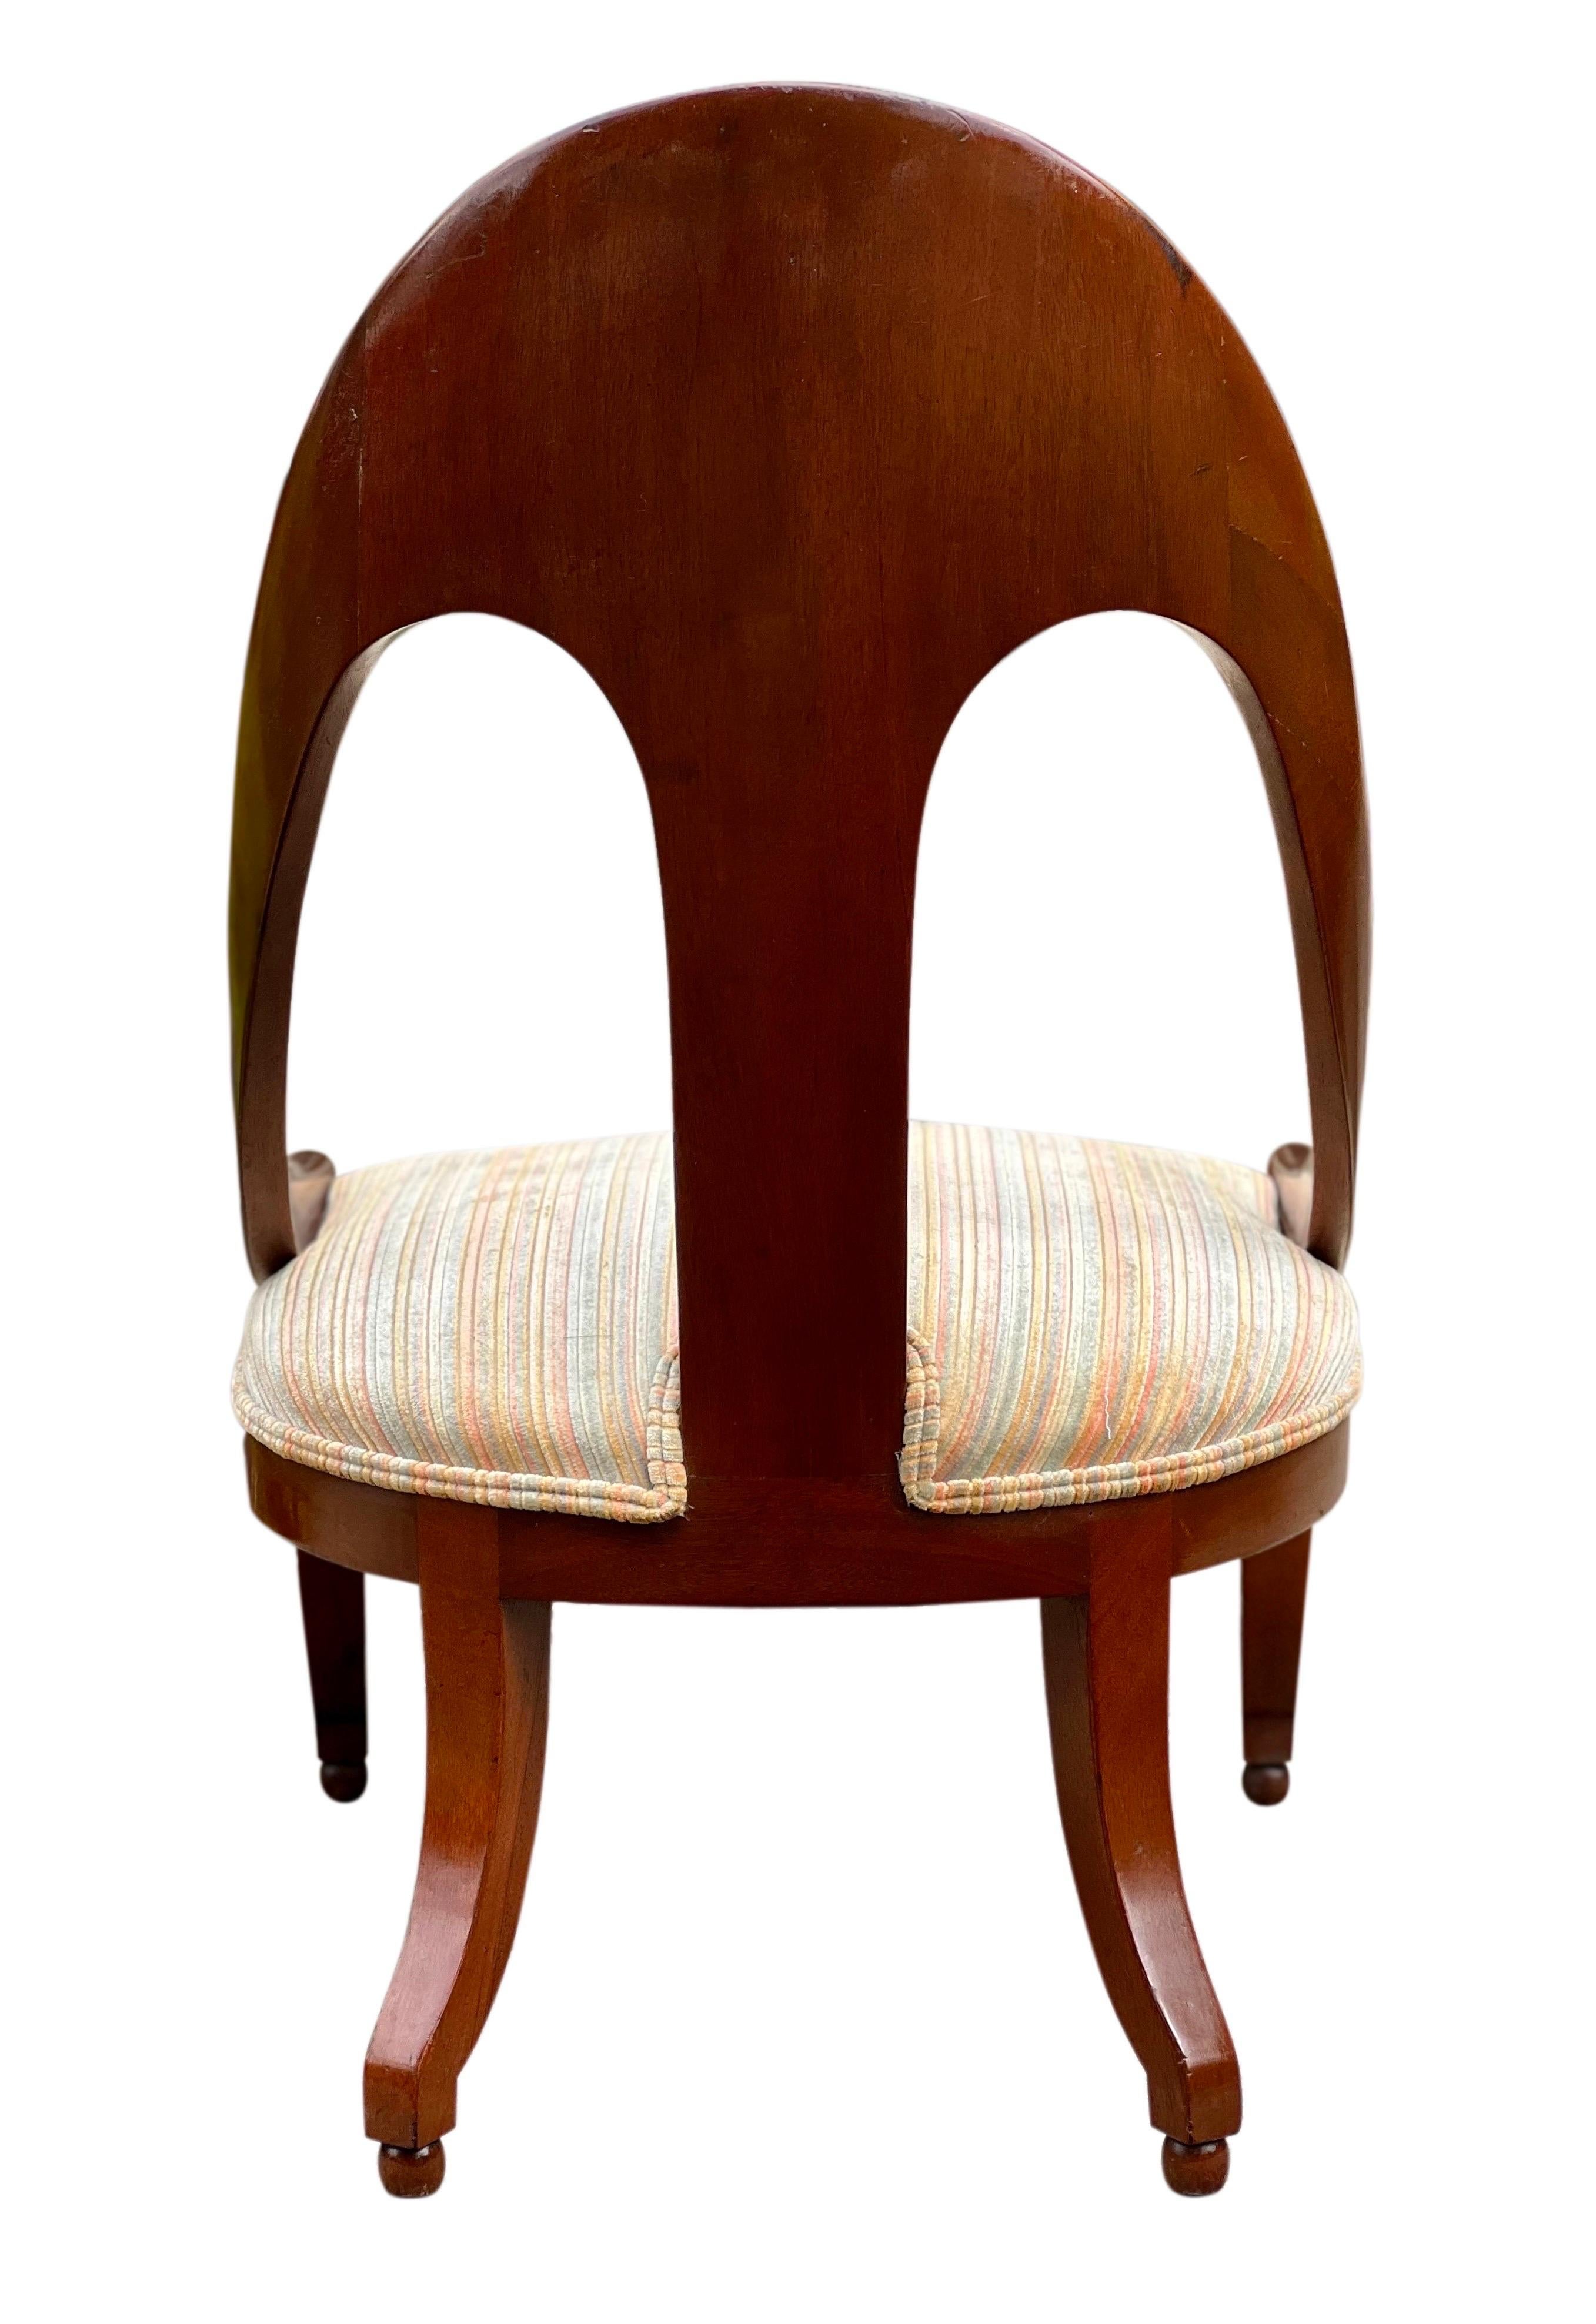 Mid Century Mahogany Slipper Lounge Chair Attributed to Michael Taylor for Baker In Good Condition For Sale In Doylestown, PA